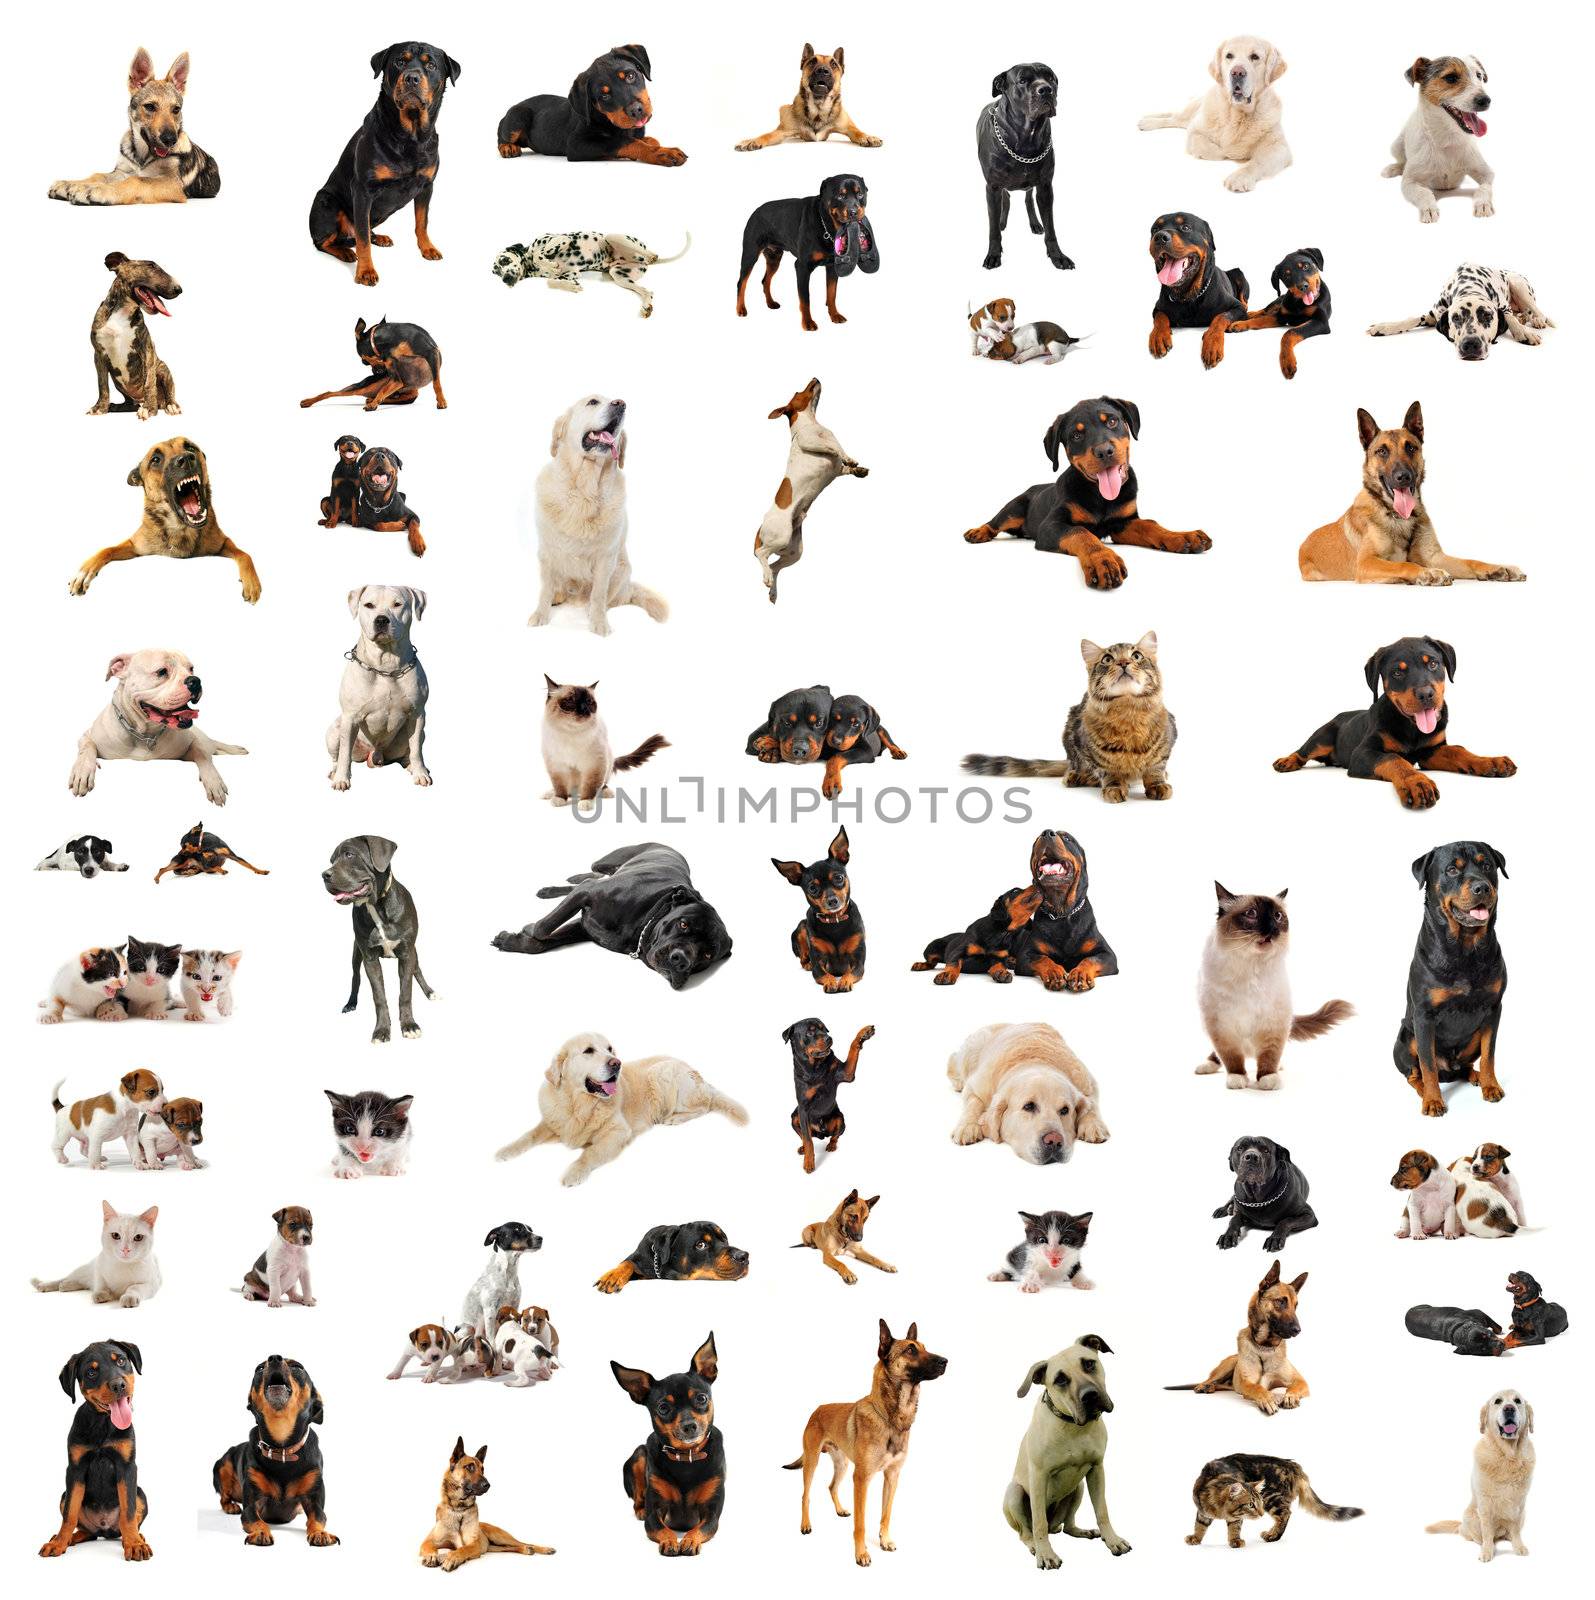 purebred dogs, puppies and cats on a white background